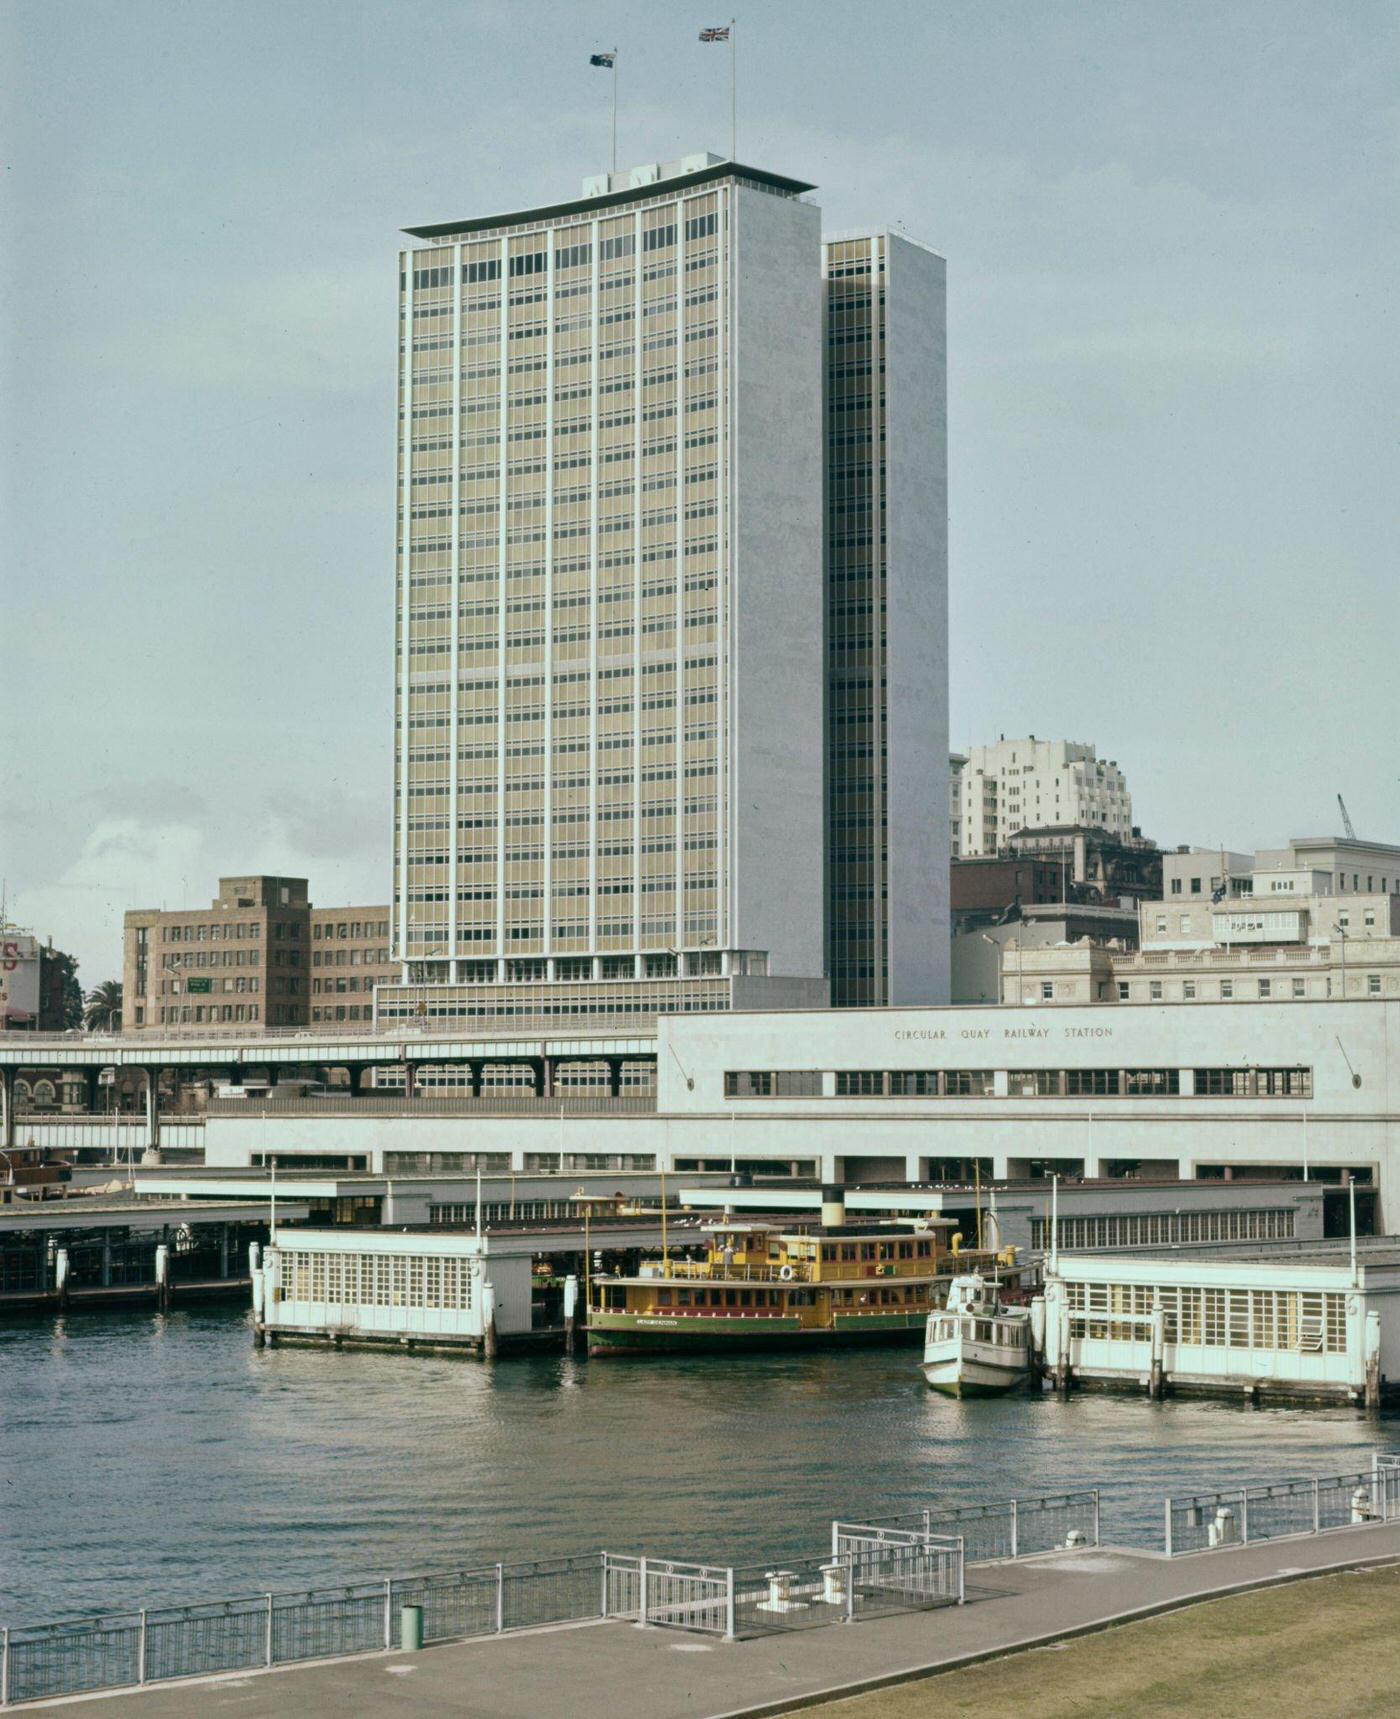 A ferry docked at the Circular Quay Railway Station passenger terminal underneath the AMP Building office block in downtown Sydney, 1963